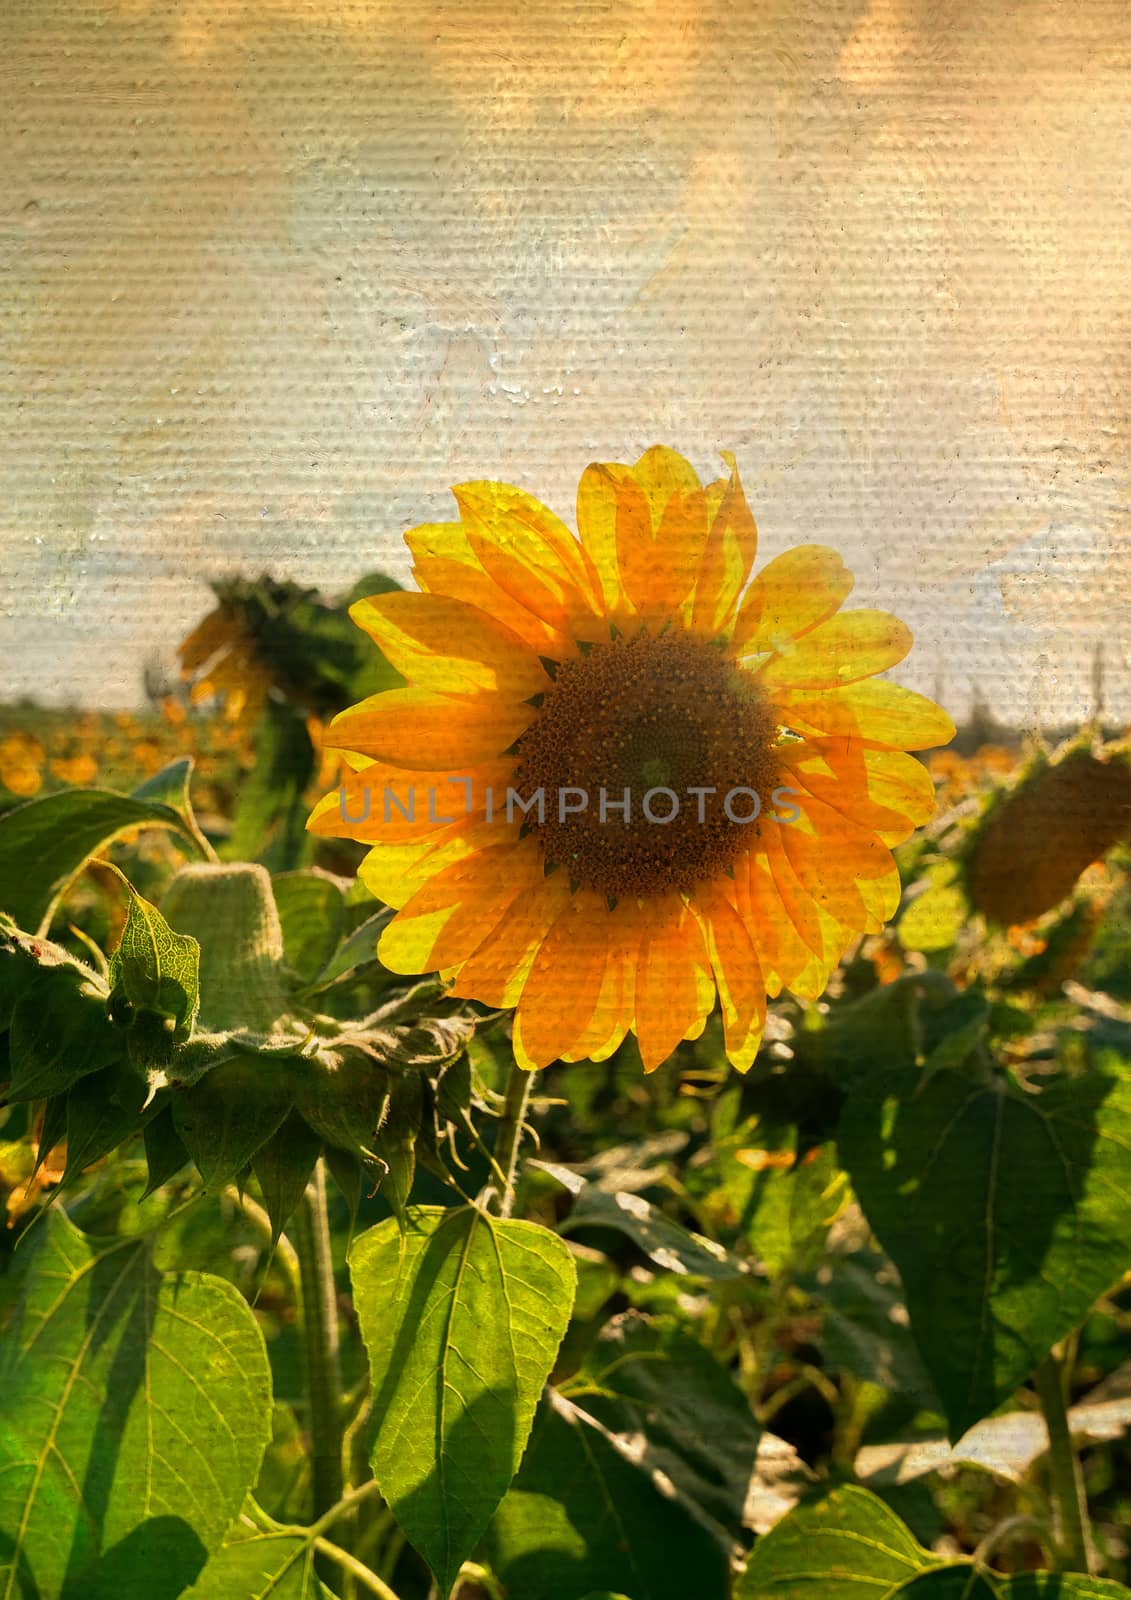 Field of sunflowers on a texture of canvas